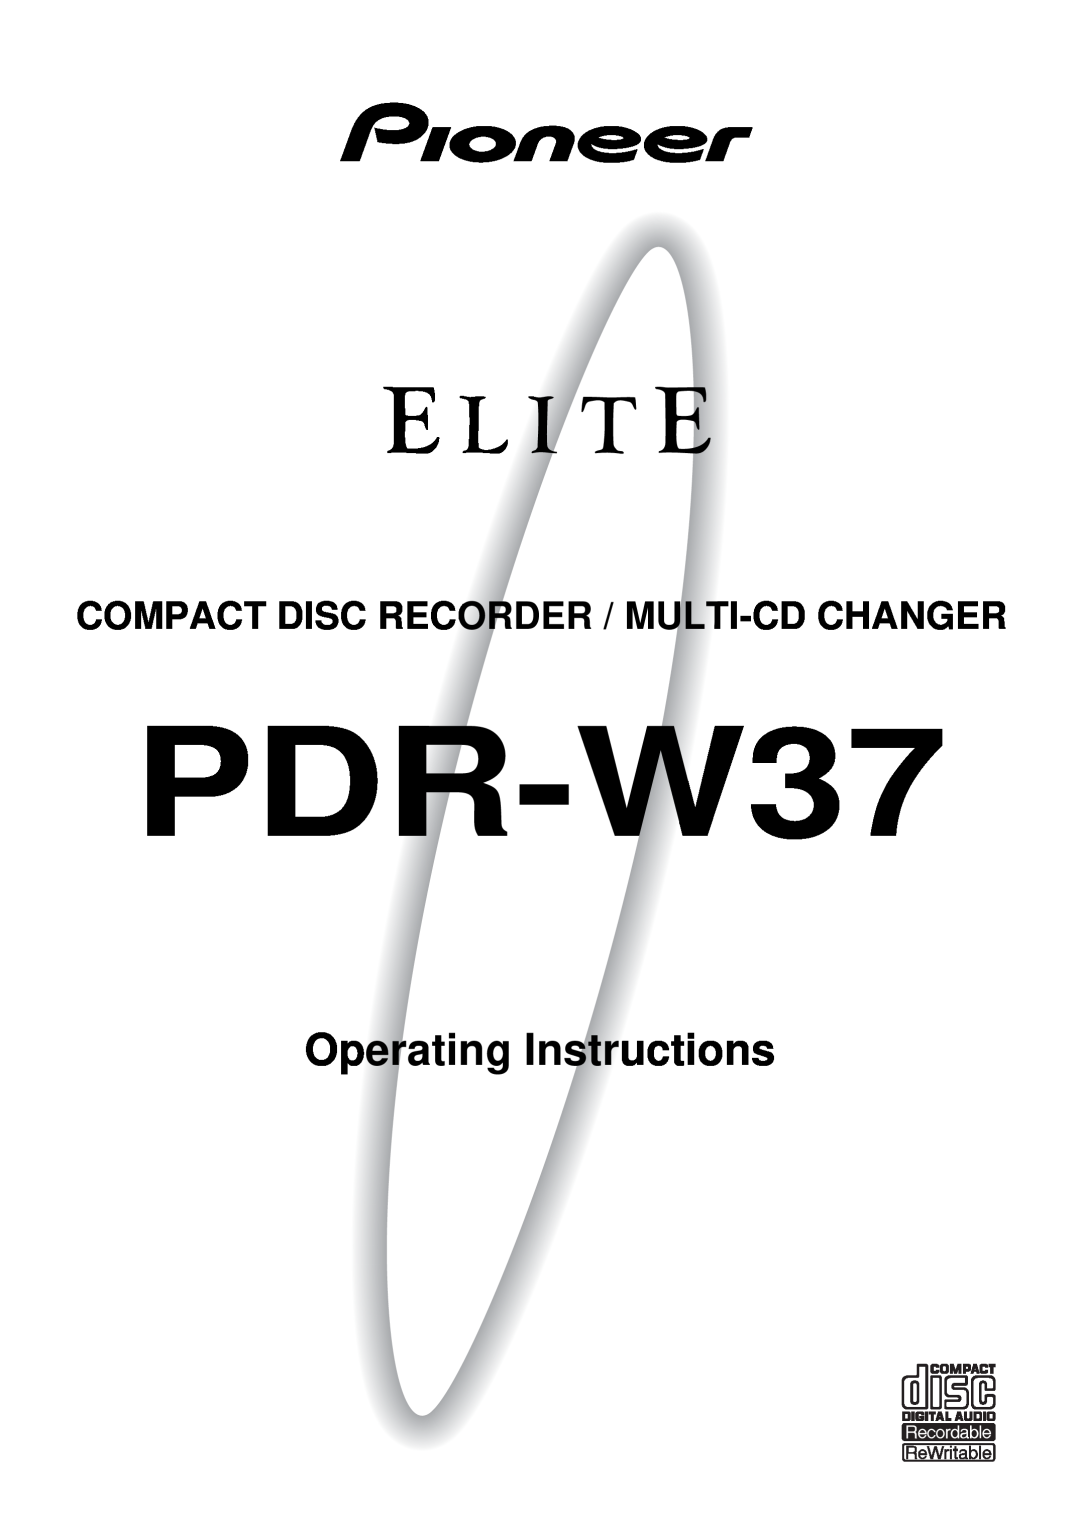 Pioneer PDR-W37 manual Operating Instructions, Compact Disc Recorder / Multi-Cdchanger 